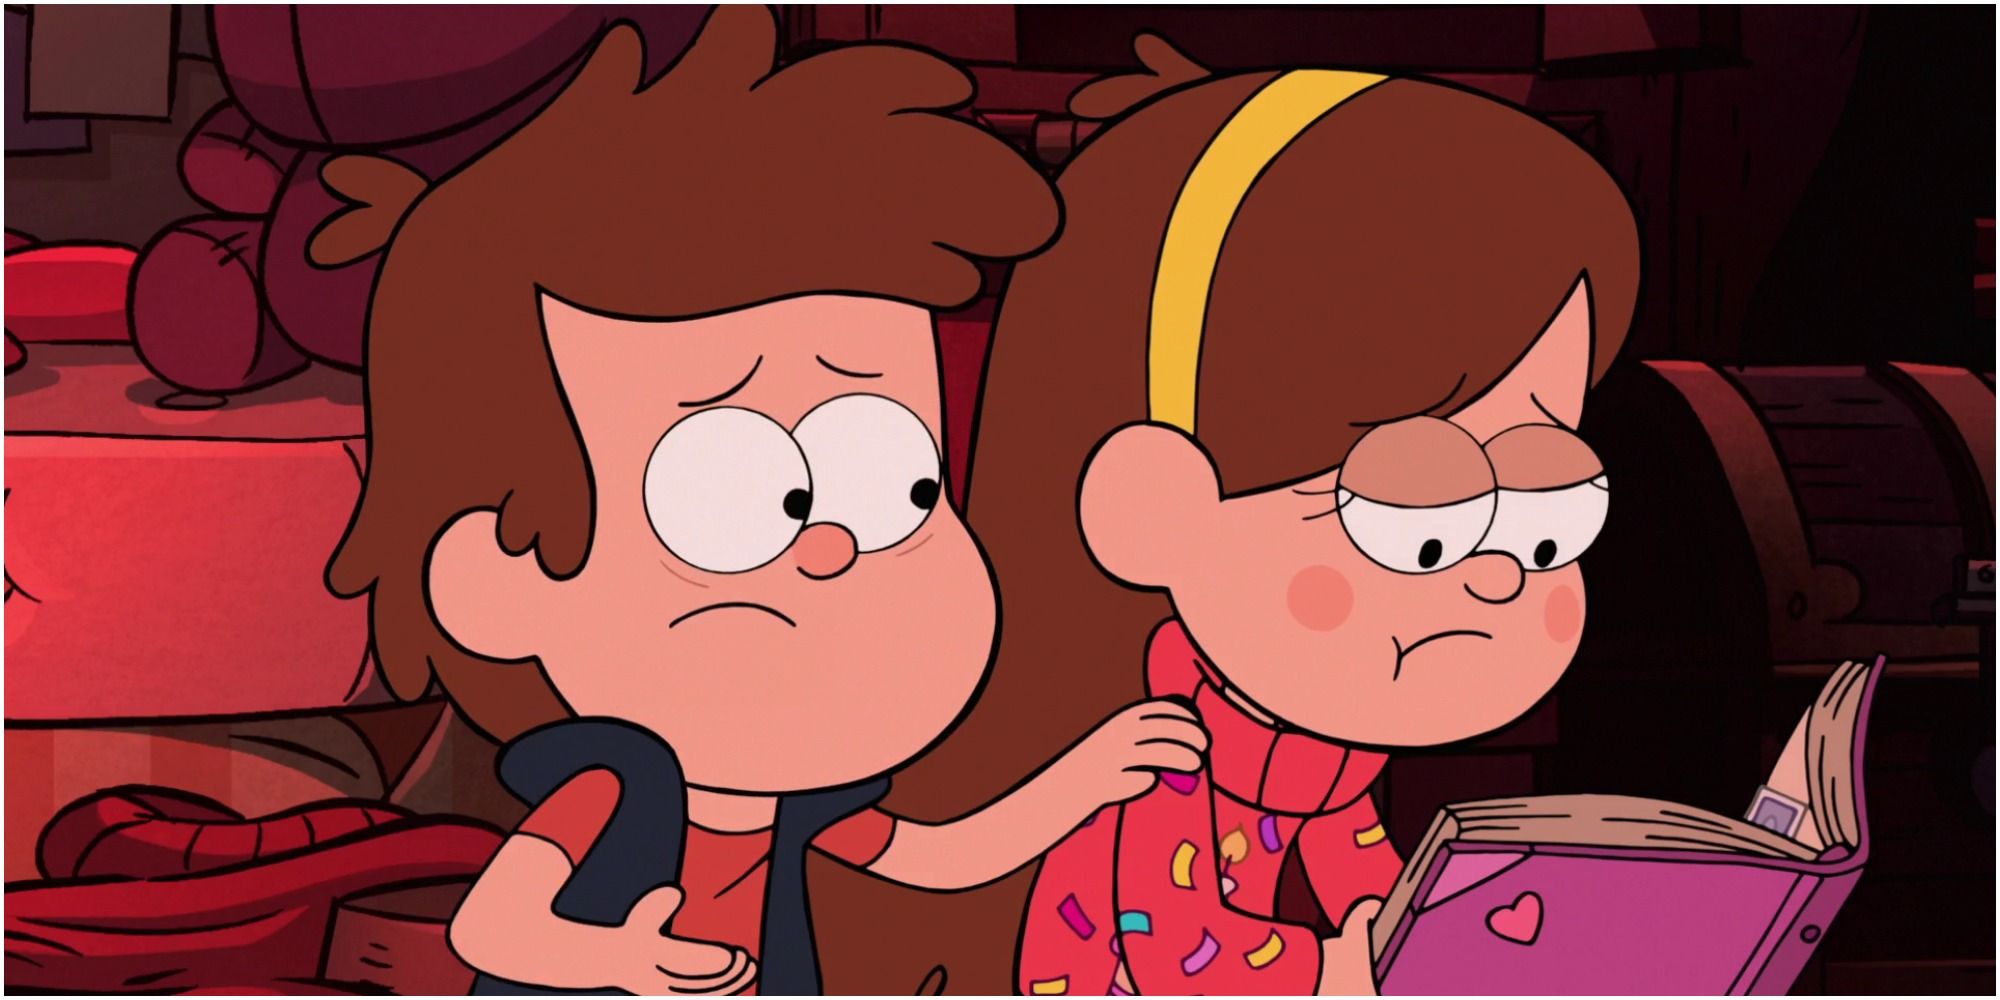 Dipper comforting Mabel who is reading in Gravity Falls